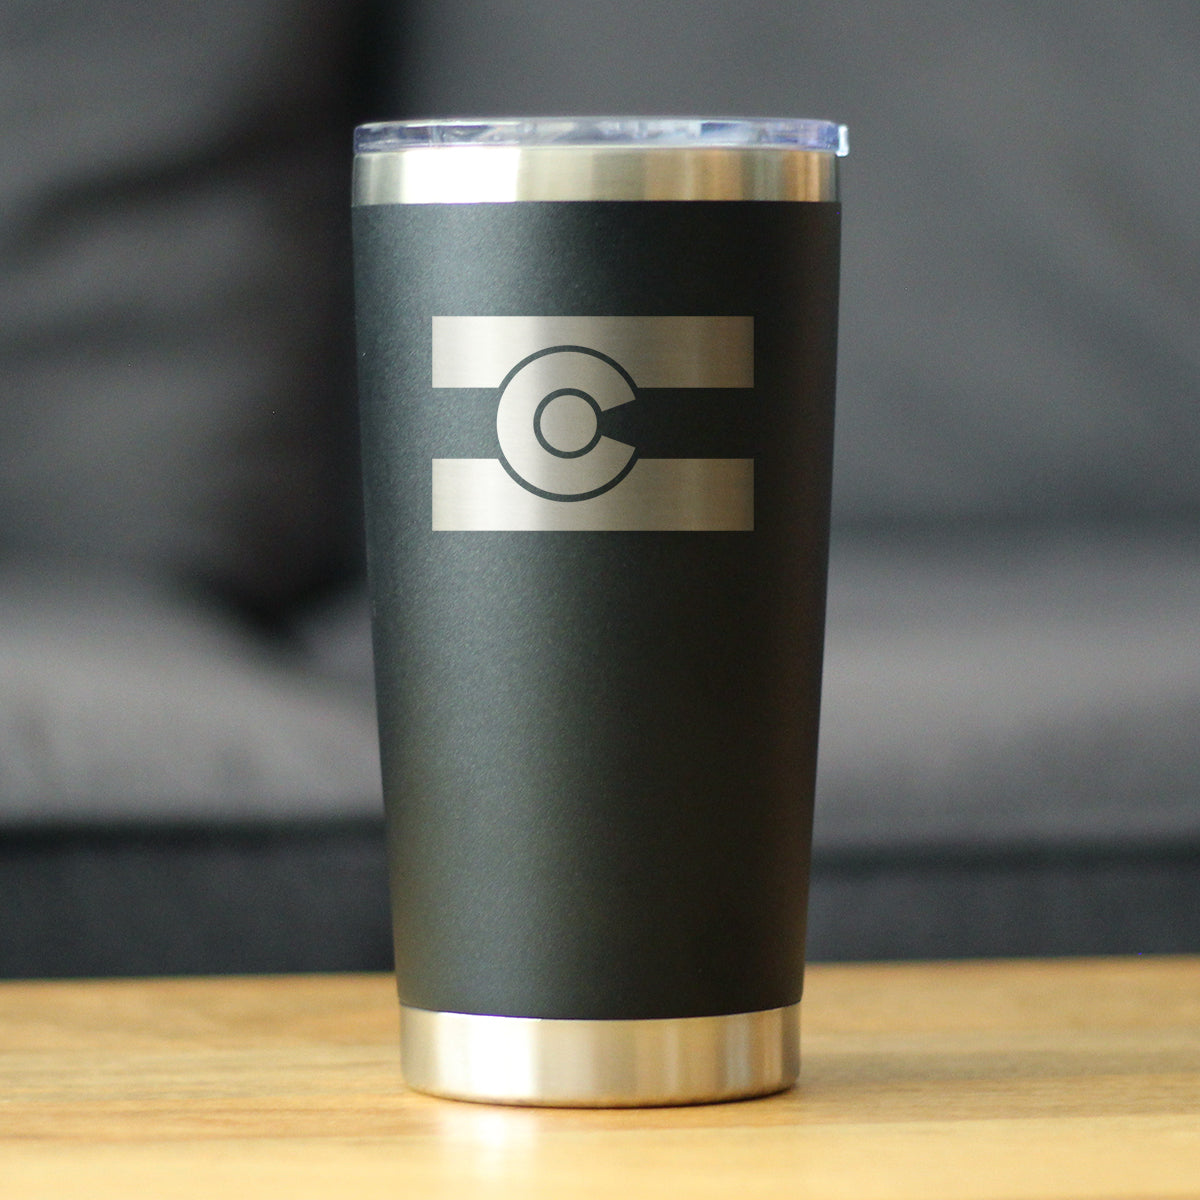 Colorado Flag - Insulated Coffee Tumbler Cup with Sliding Lid - Stainless Steel Insulated Mug - Cute Outdoor Camping Mug